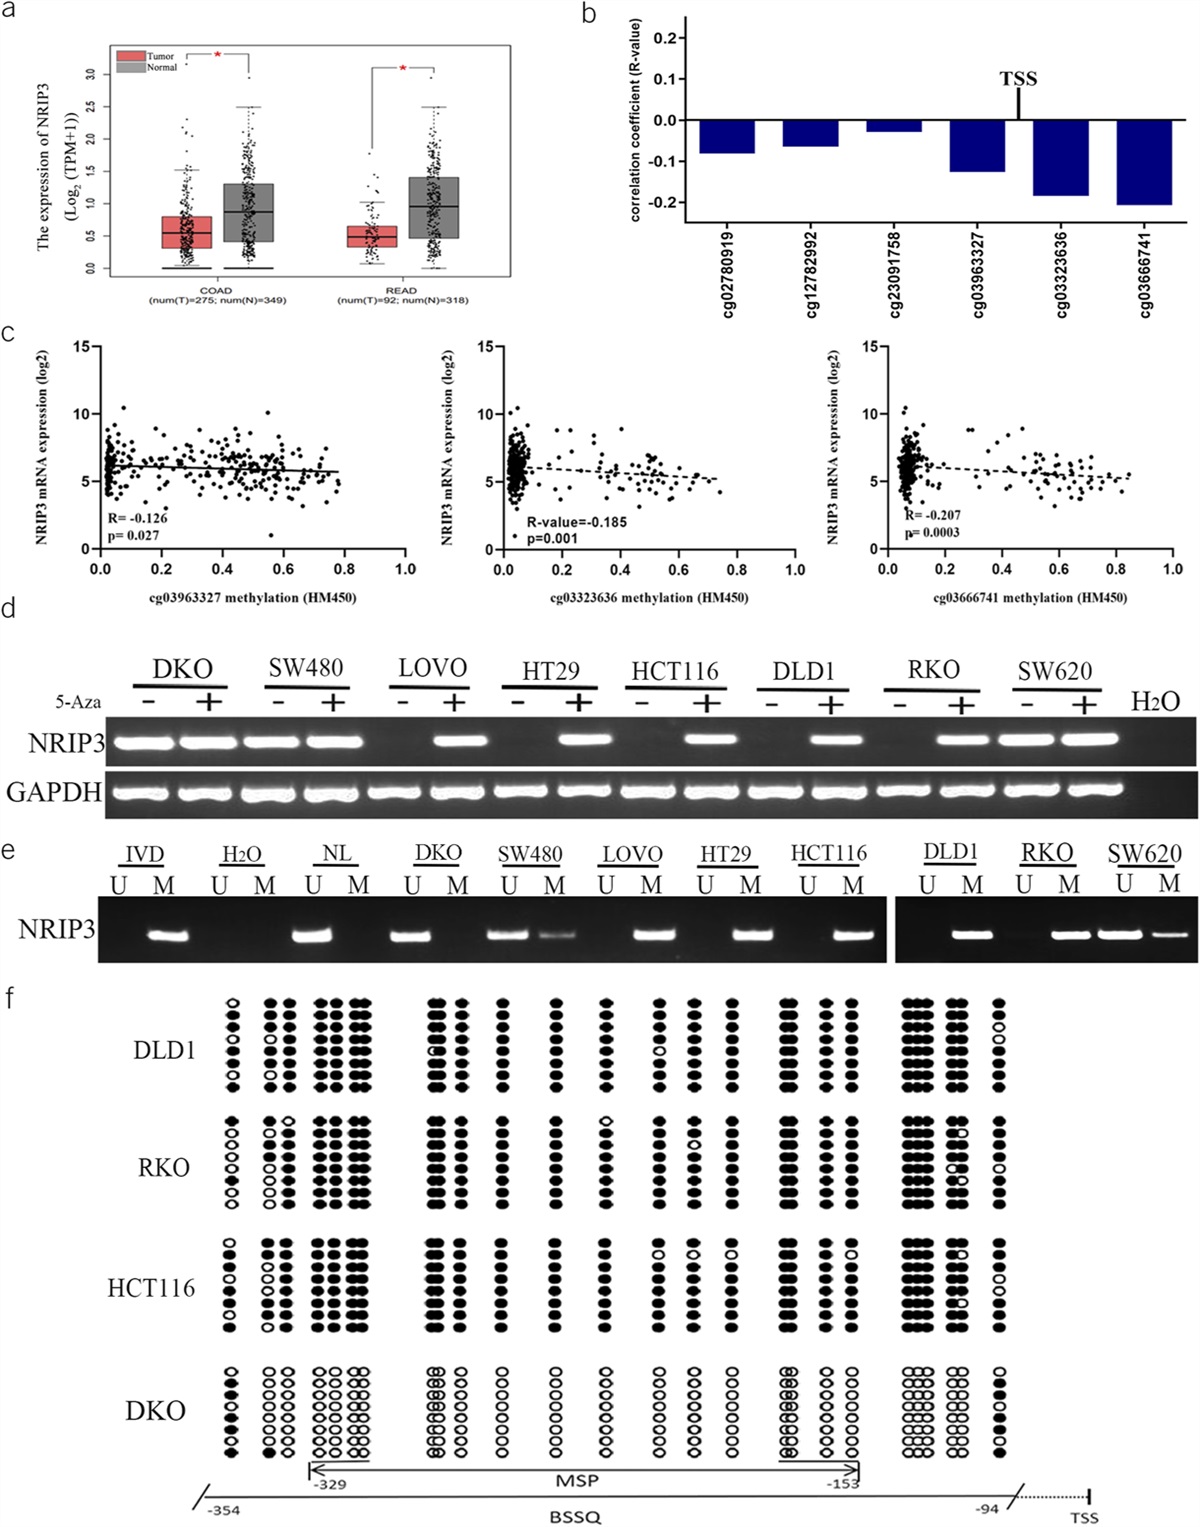 Methylation of NRIP3 Is a Synthetic Lethal Marker for Combined PI3K and ATR/ATM Inhibitors in Colorectal Cancer